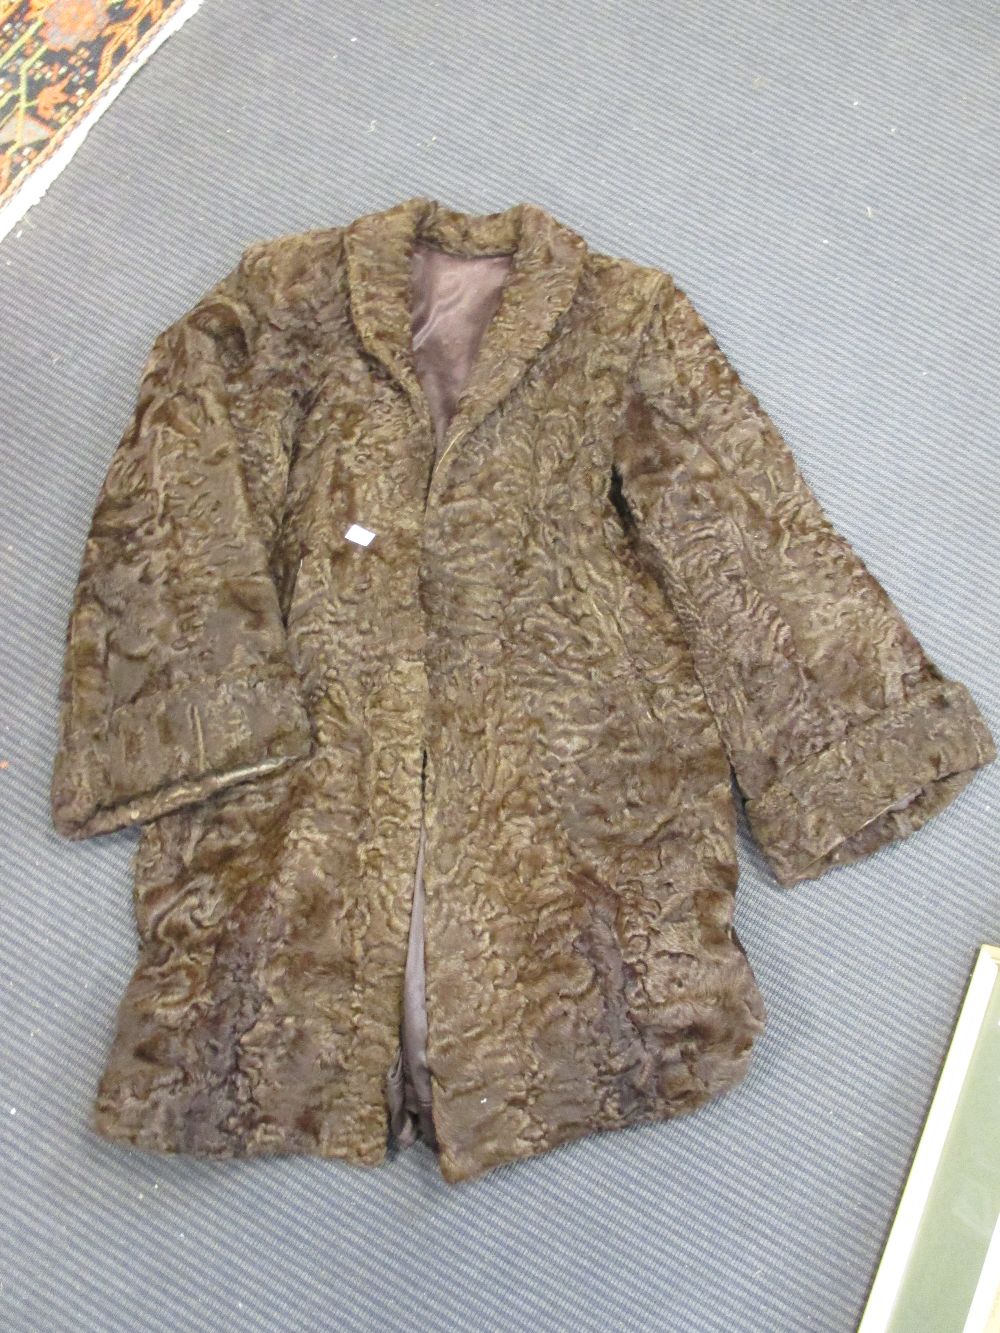 An Astrakhan fur coat, a small fur jacket, an academic gown and a small rug (4)